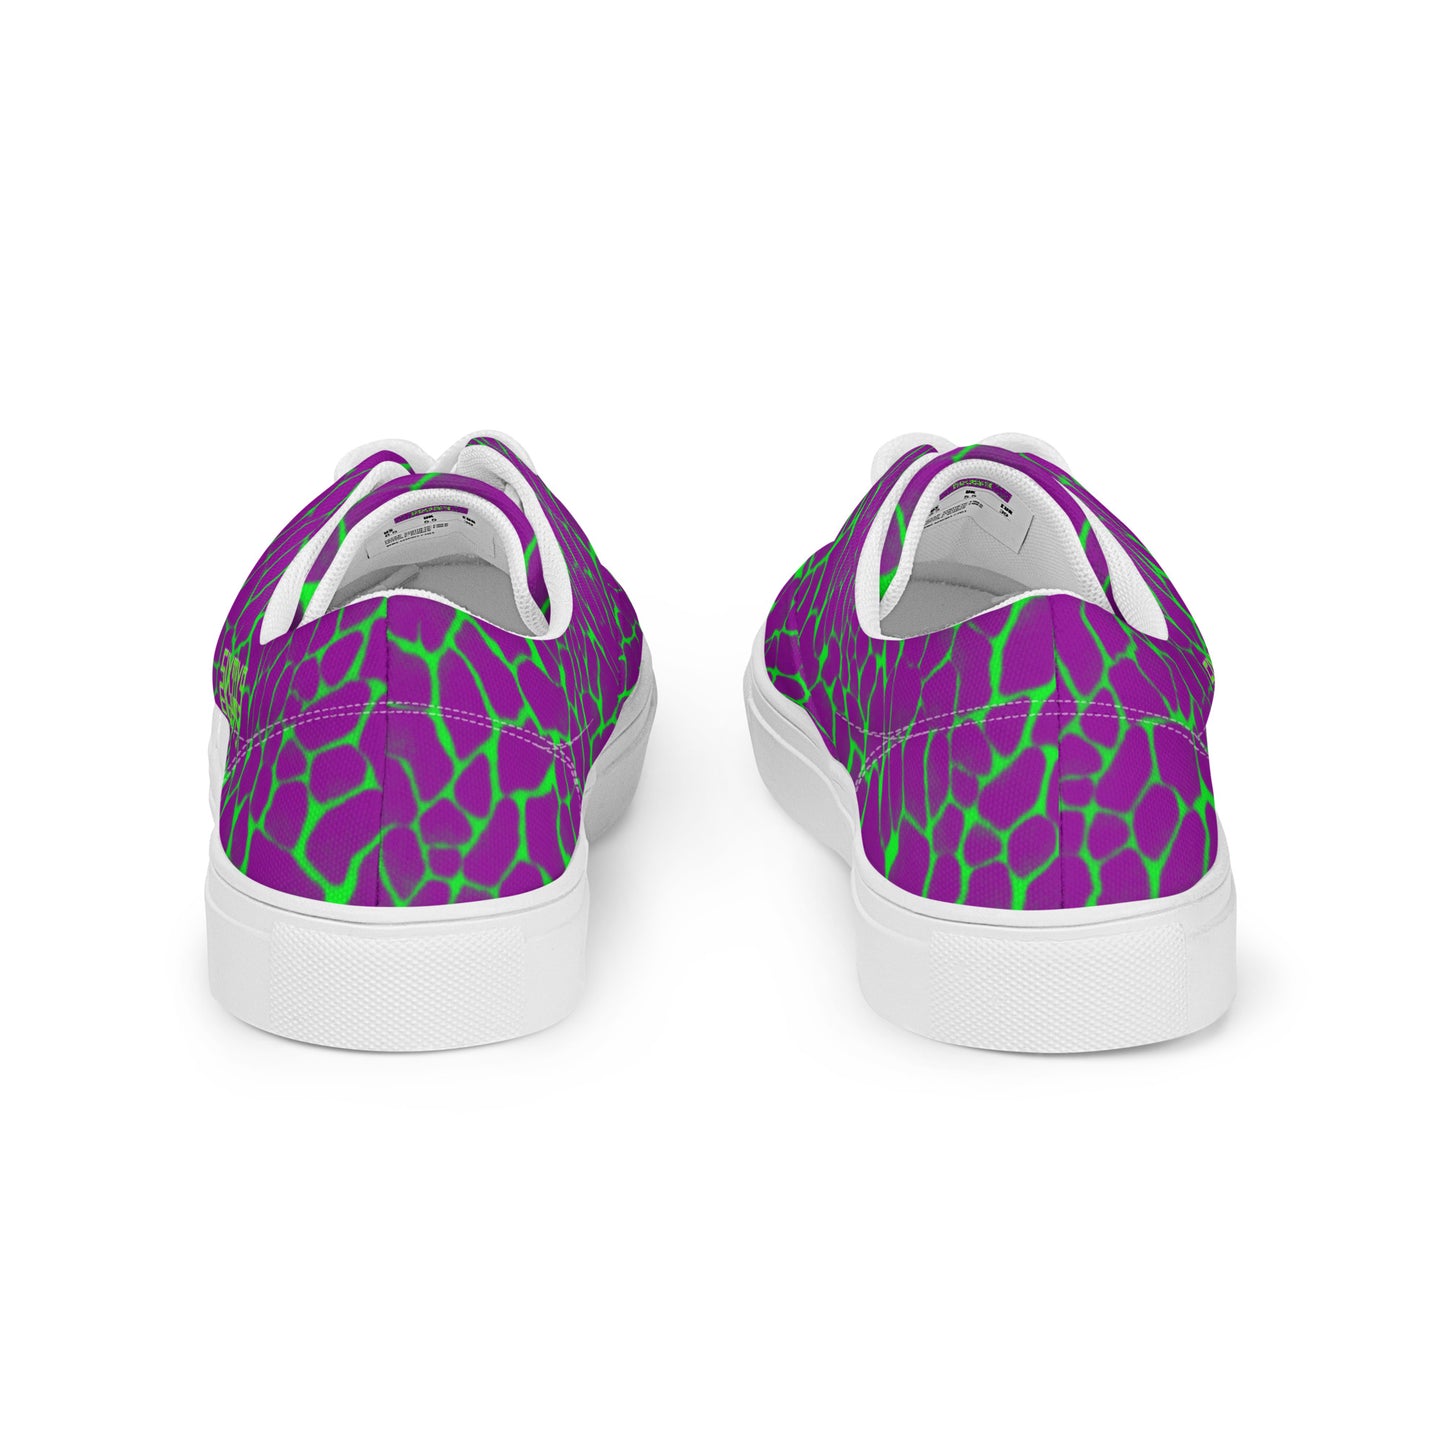 Sixty Eight 93 Logo Lime Green & White Boa Purple Lime Men's Low Top Shoes